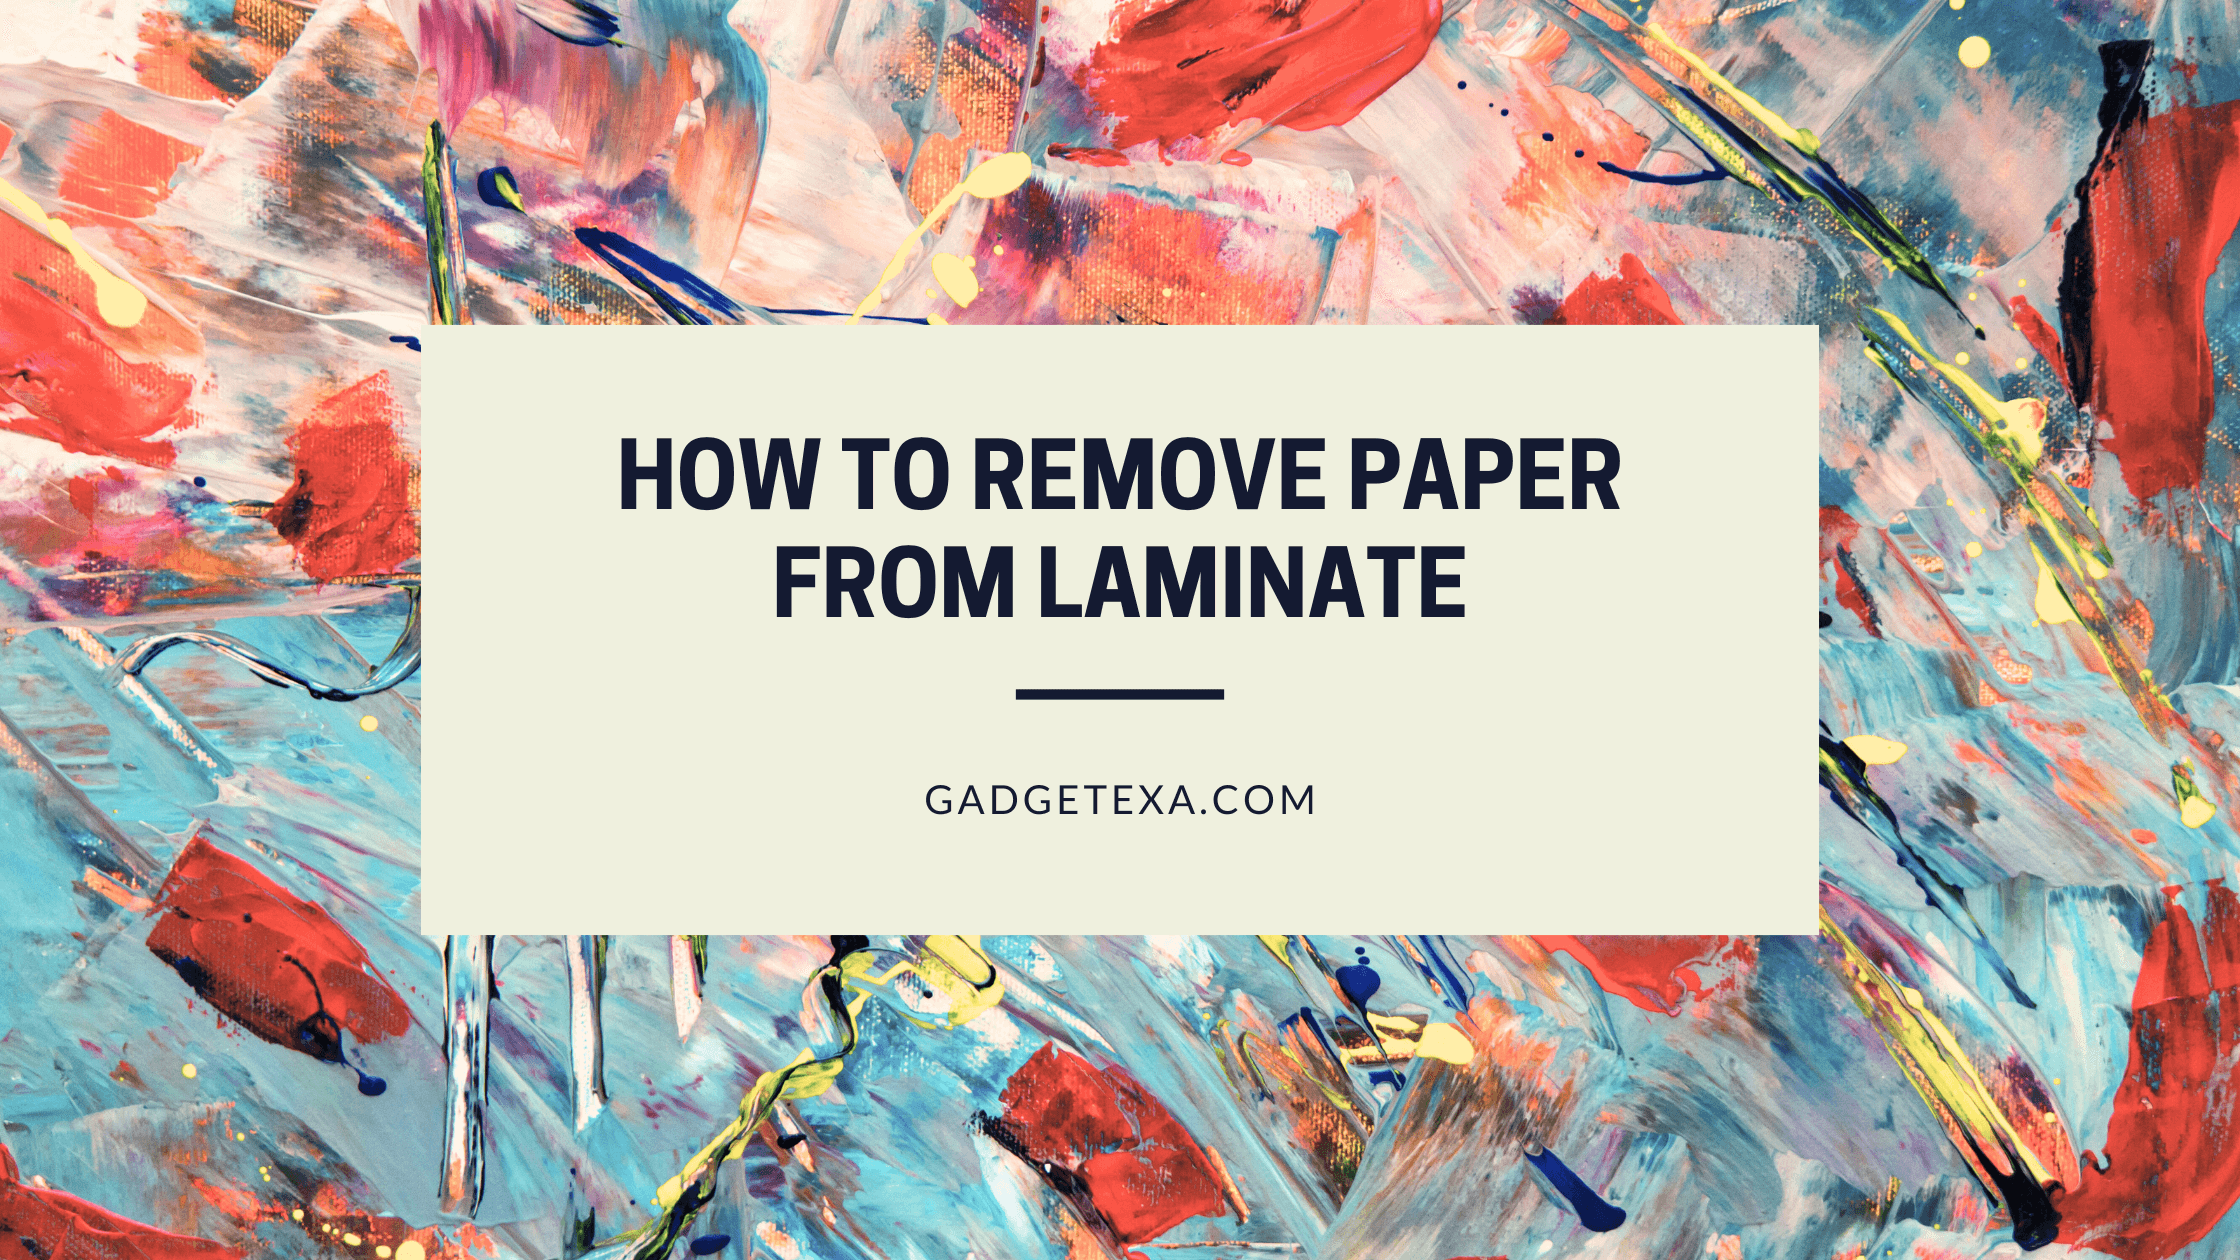 How to Remove Paper From Laminate (1)